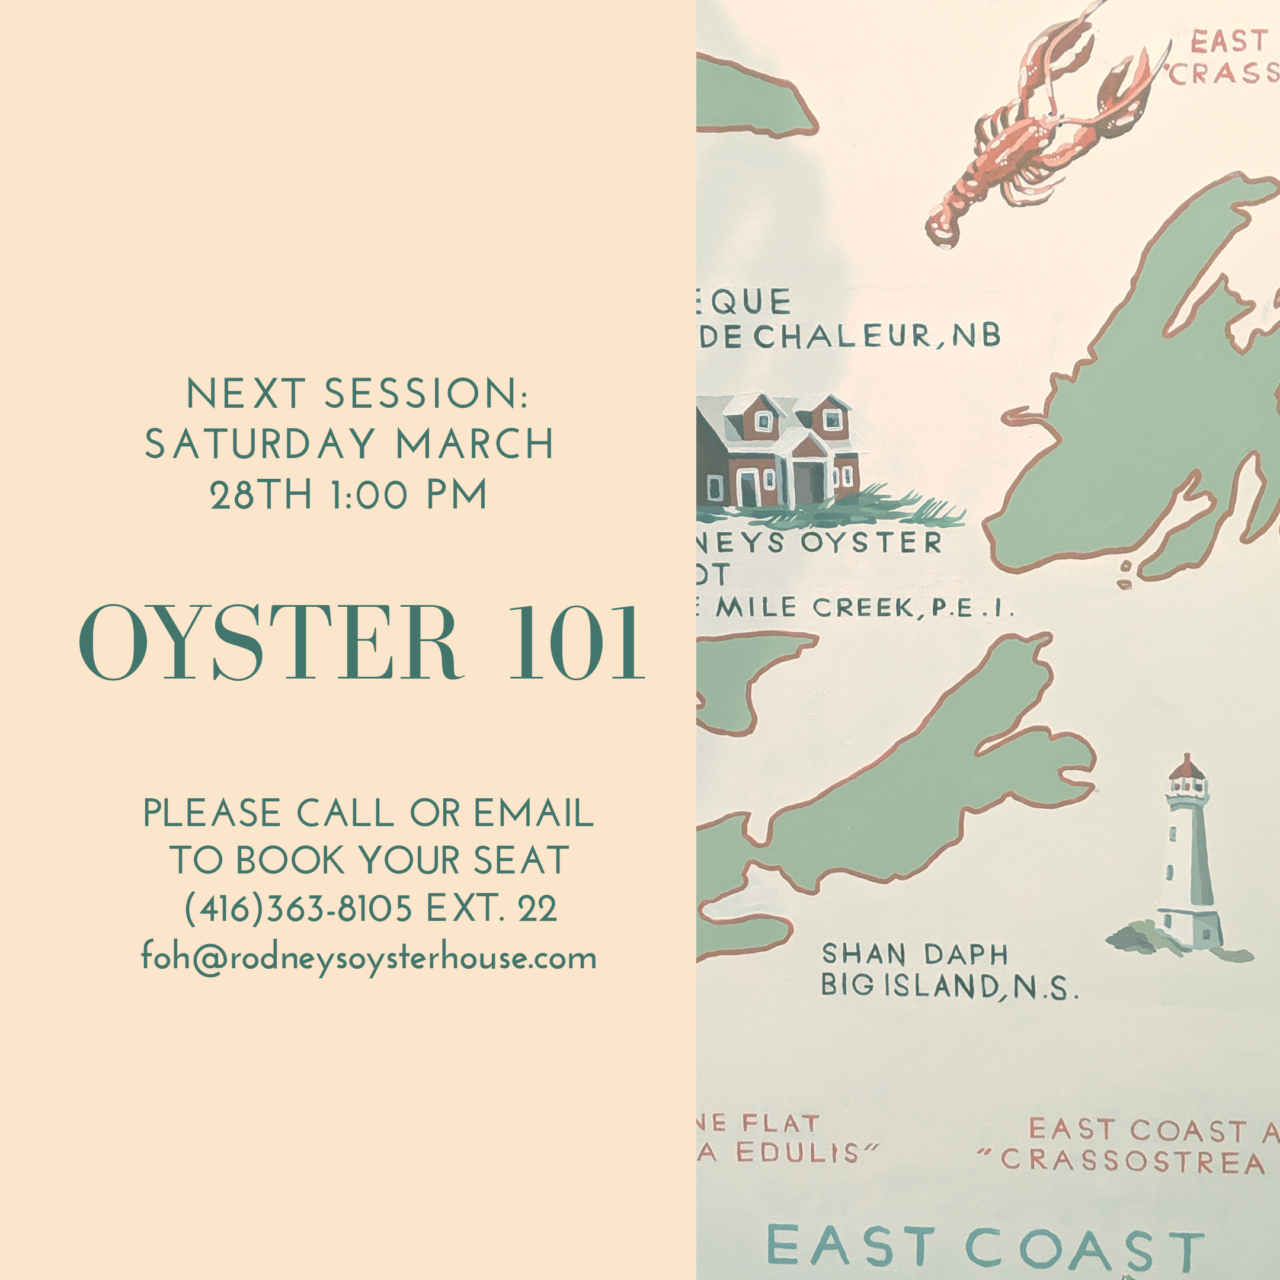 Next Oyster 101 is March 28!